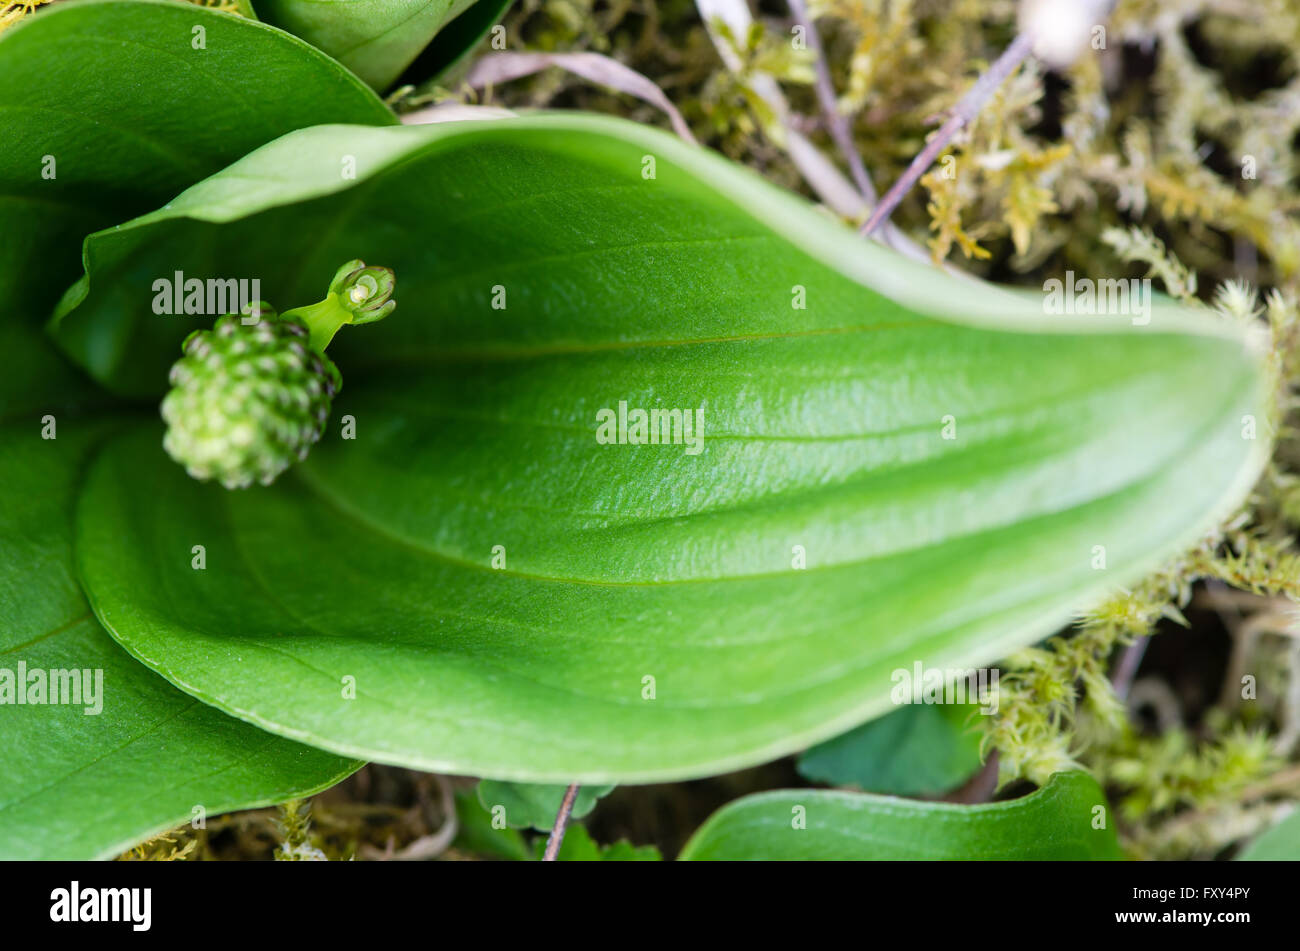 Common twayblade (Neottia ovata). Green flower of rare plant in the family Orchidaceae, showing single flower open on plant Stock Photo